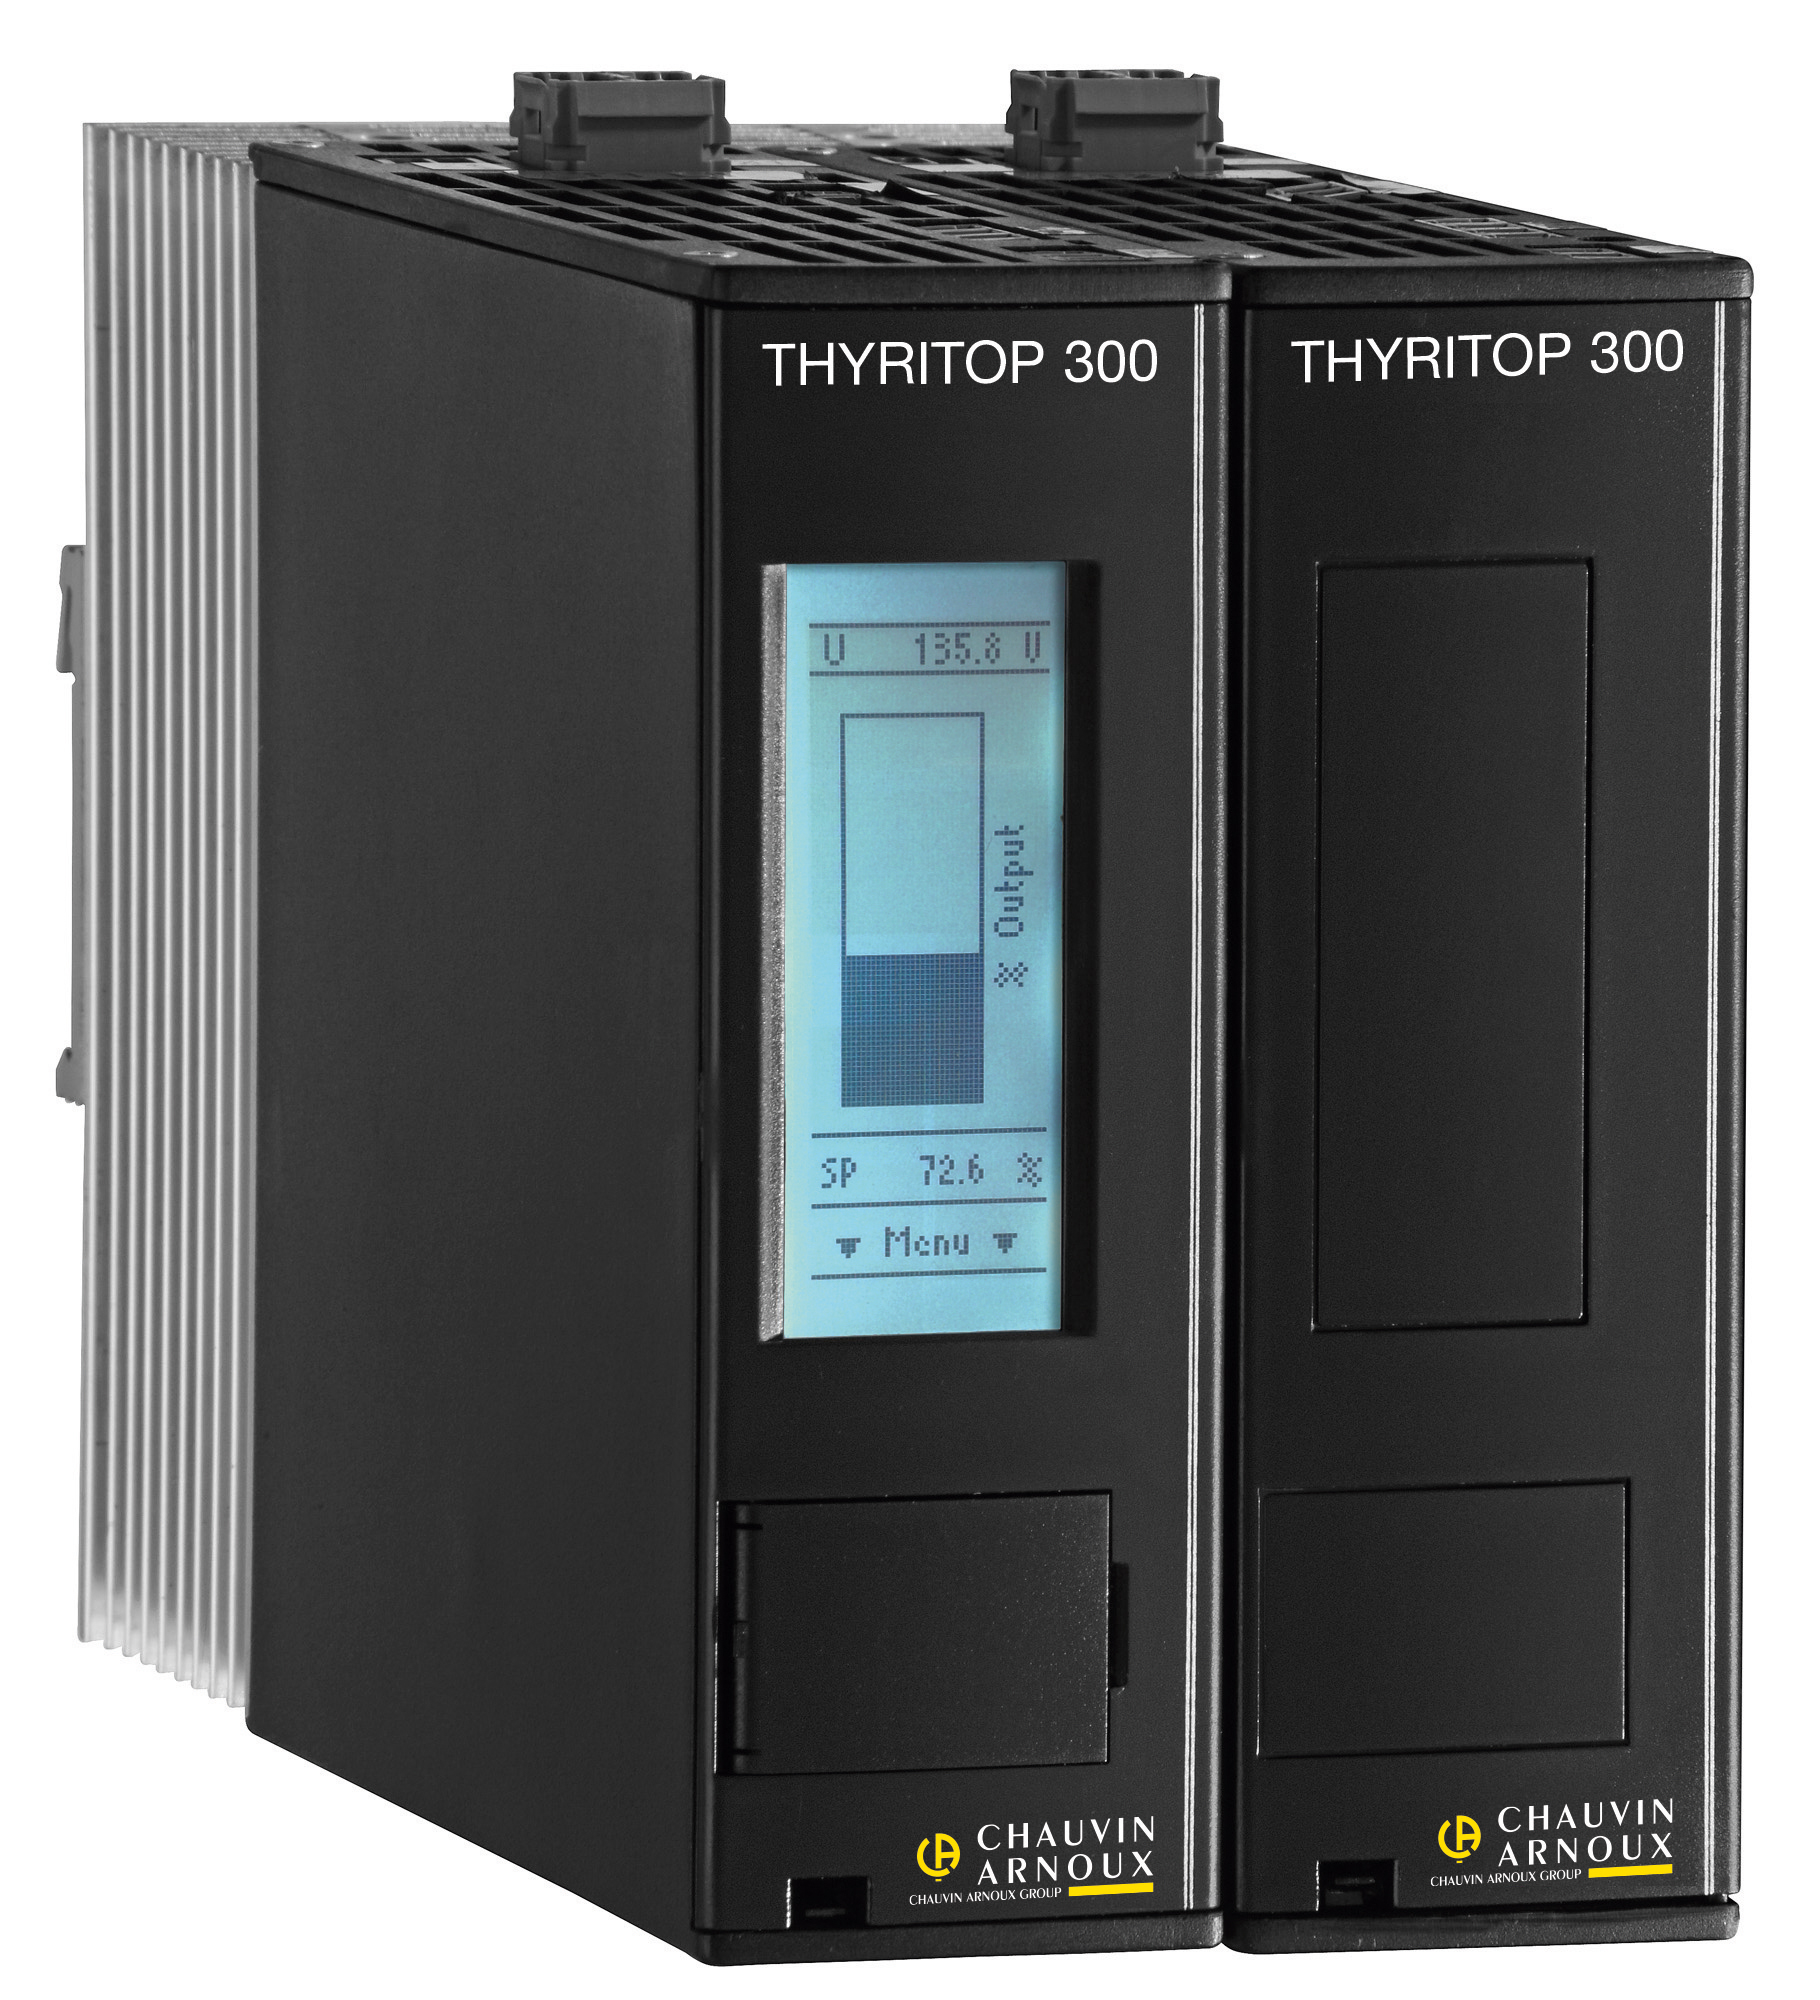 Thyritop 300, Pyrocontrole power controllers